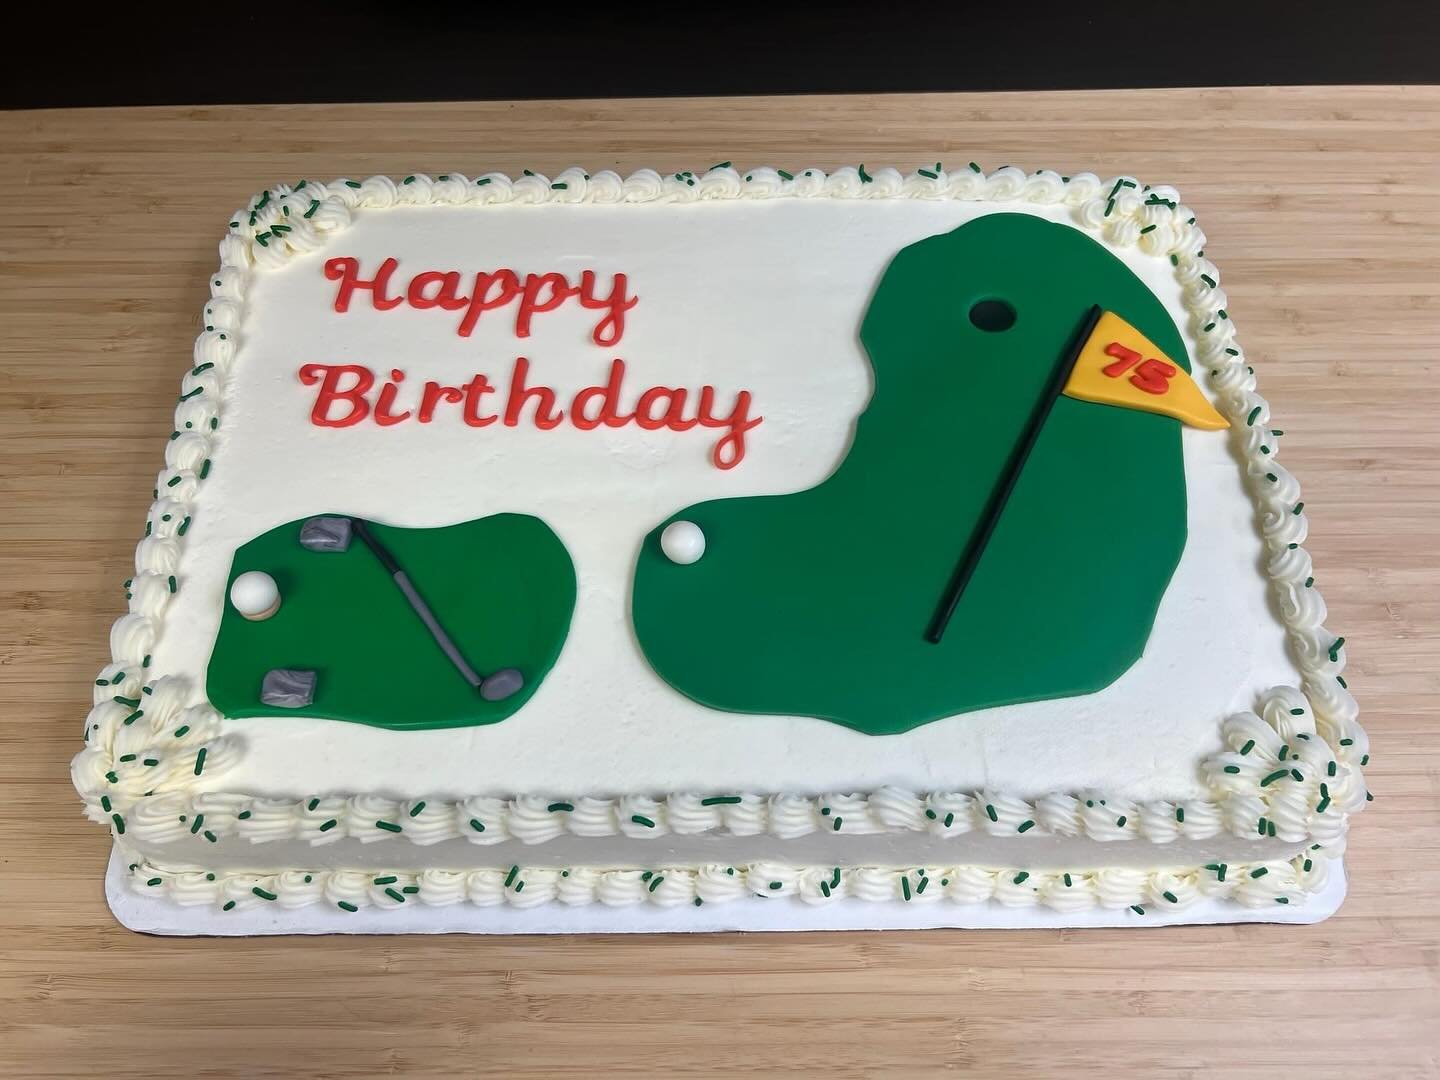 A fun 75th golf cake to swing into the weekend! FORE!!!

 #johnsonvillecakes #cakesofwaco #birthdaycakesofwaco #cakesofmcgregor #wacocakes #cakesofwacotexas #cakesofmcgregortexas #wacogolf